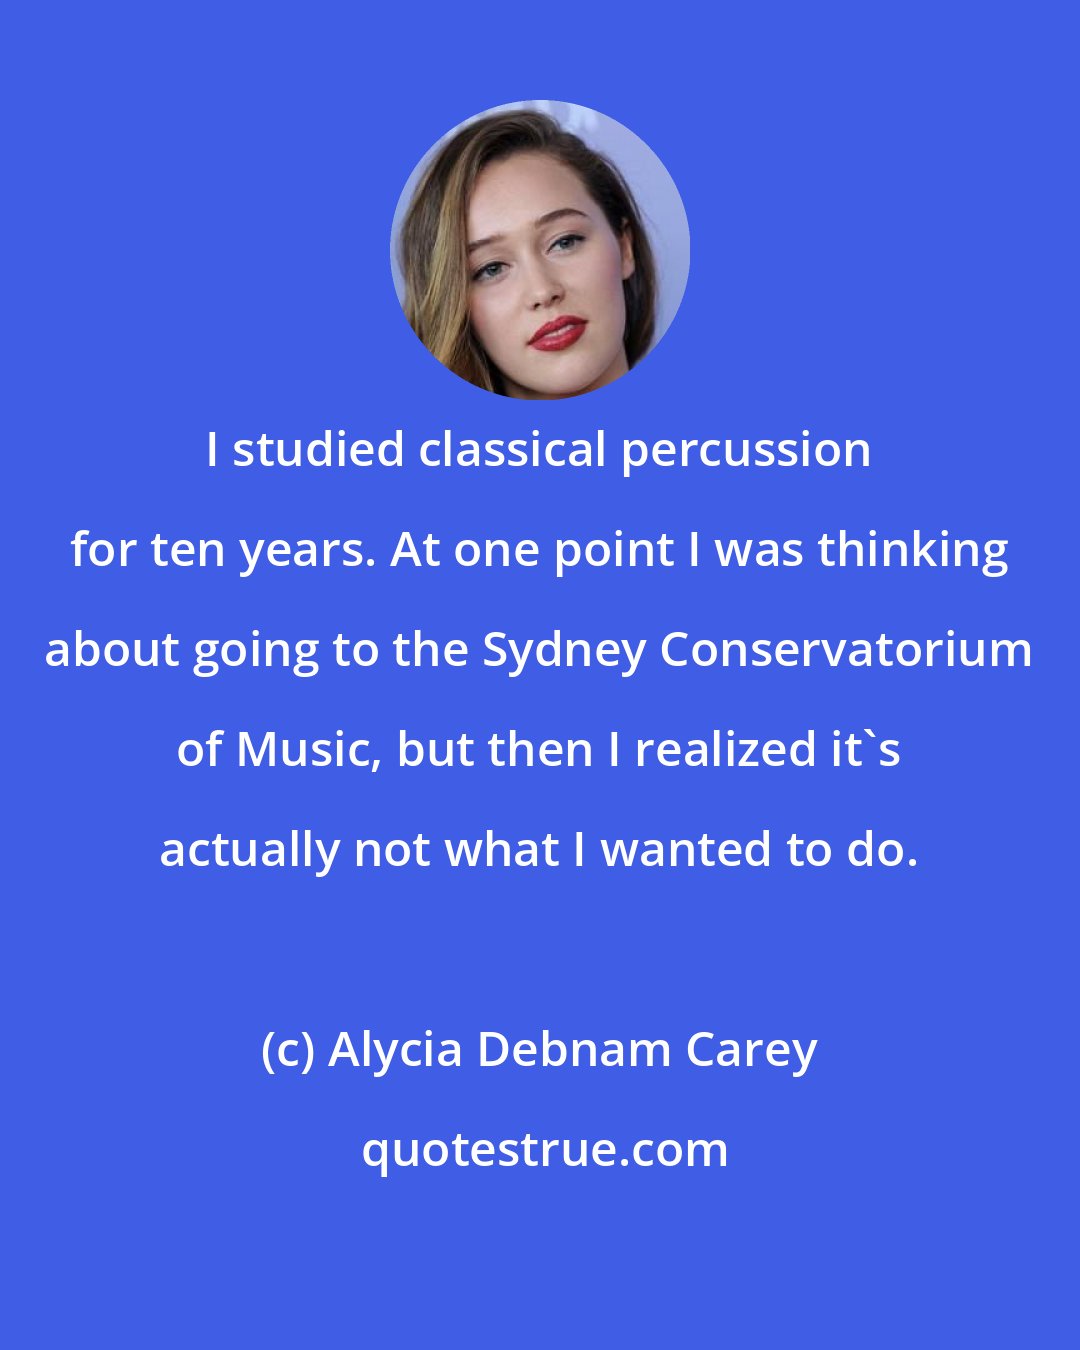 Alycia Debnam Carey: I studied classical percussion for ten years. At one point I was thinking about going to the Sydney Conservatorium of Music, but then I realized it's actually not what I wanted to do.